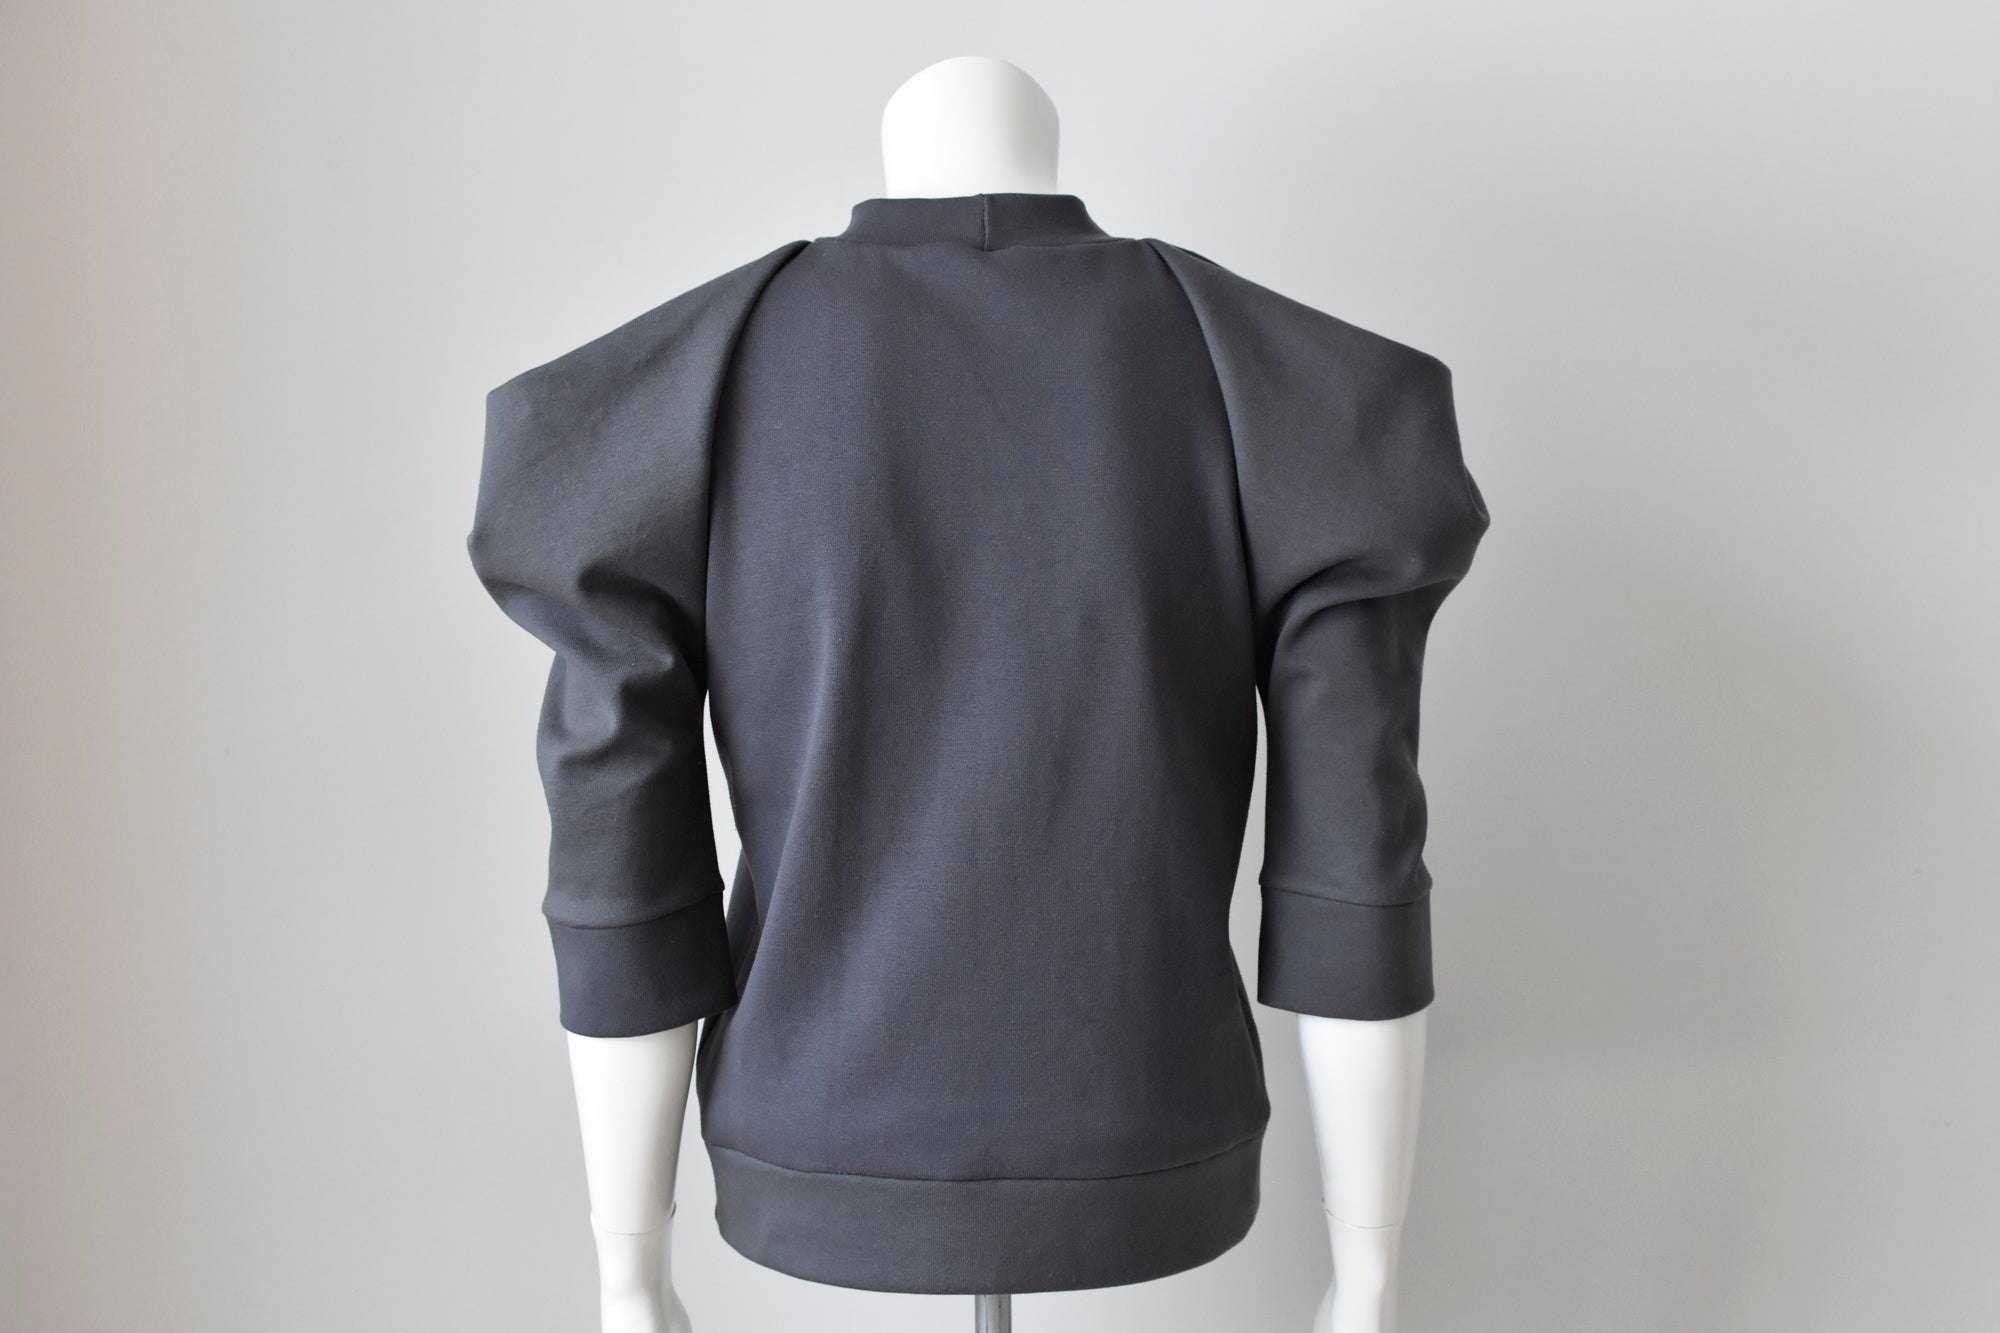 MUSCLE-SWEATER anthracite